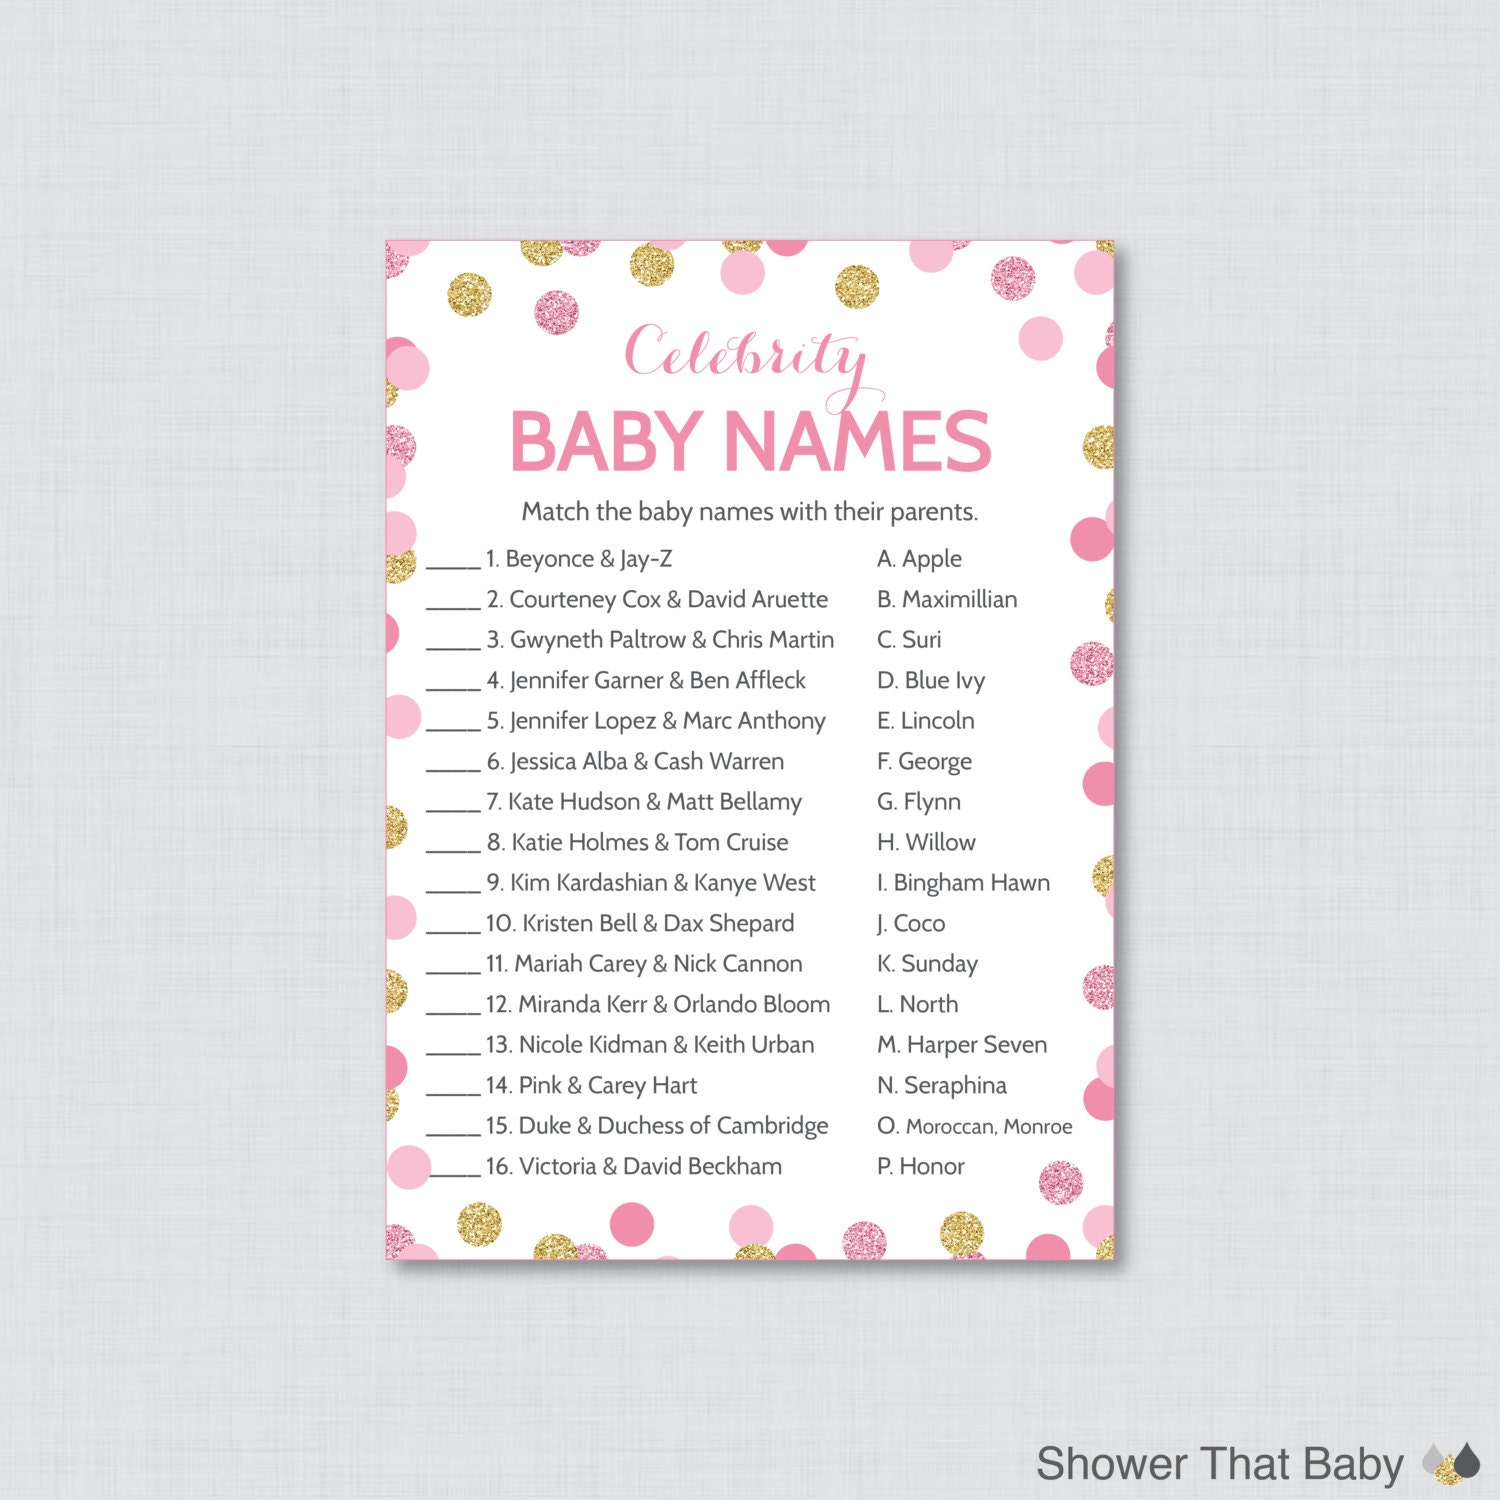 celebrity-baby-name-baby-shower-game-baby-shower-games-celebrity-baby